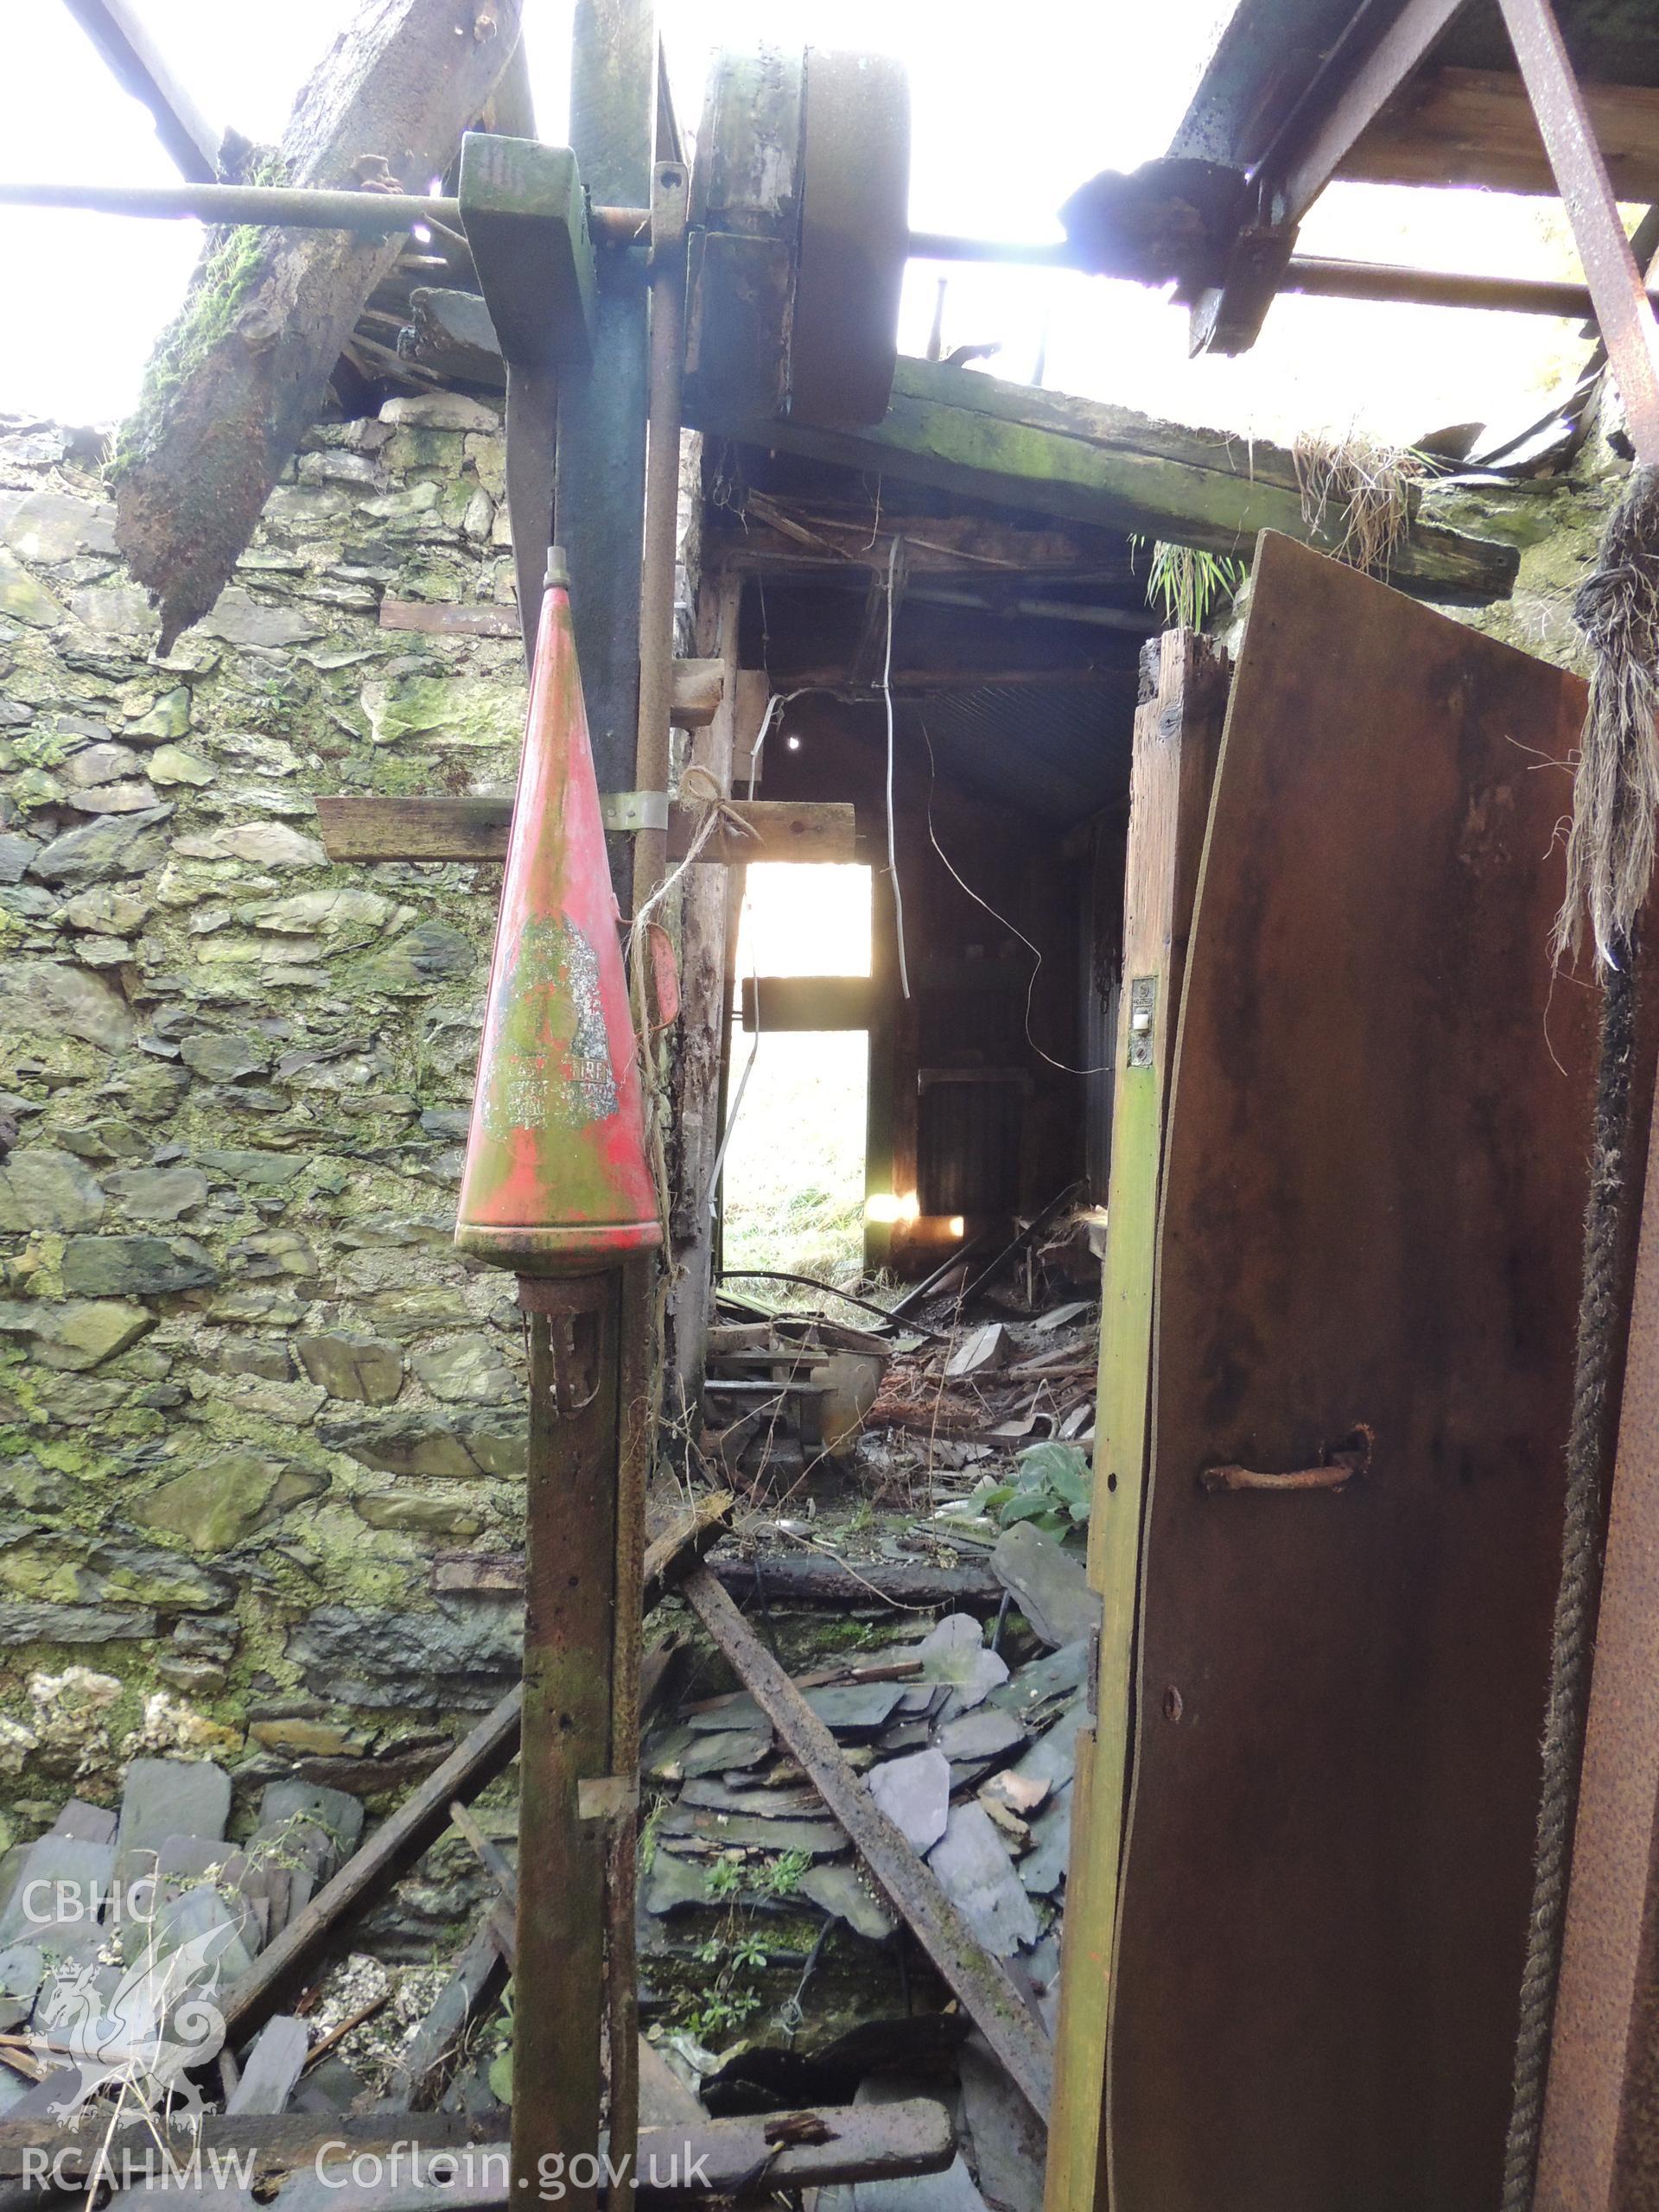 Remains of threshing machine with conical fire extinguisher, looking north. Photographed for archaeological building survey conducted at Bryn Gwylan Threshing Barn, Llangernyw, Conwy, by Archaeology Wales, 2017-2018. Report no. 1640. Project no. 2578.